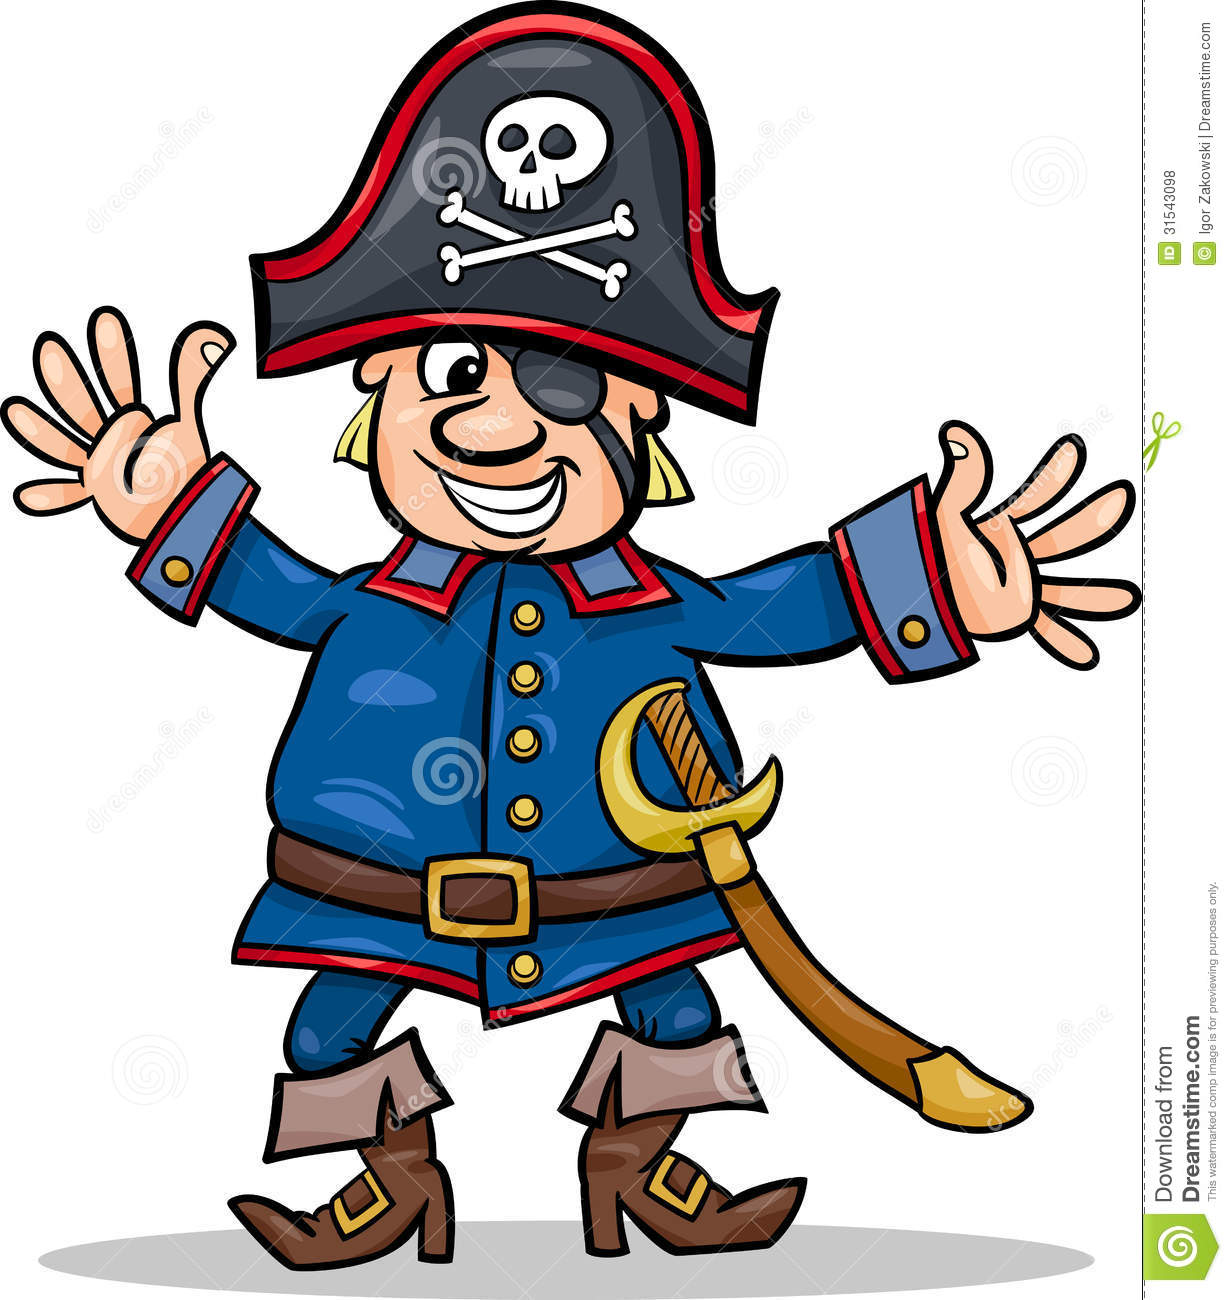 Cartoon Illustration Of Funny Pirate Or Corsair Captain With Eye Patch